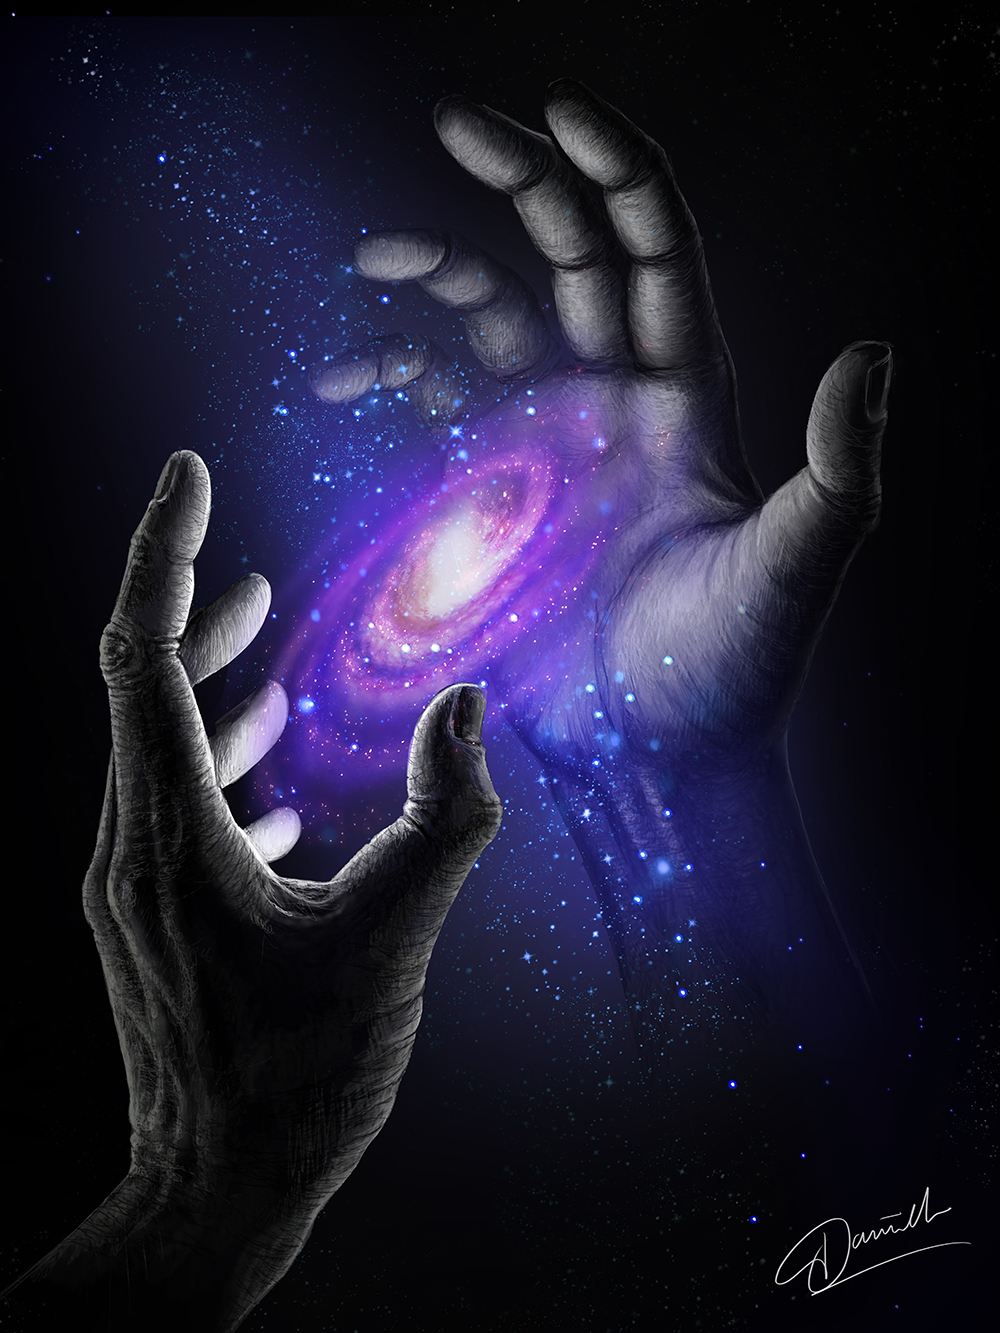 Danielle Futselaar on X: My newest drawing Magic Hands #drawing  #illustration #hands #space #MilkyWay  / X